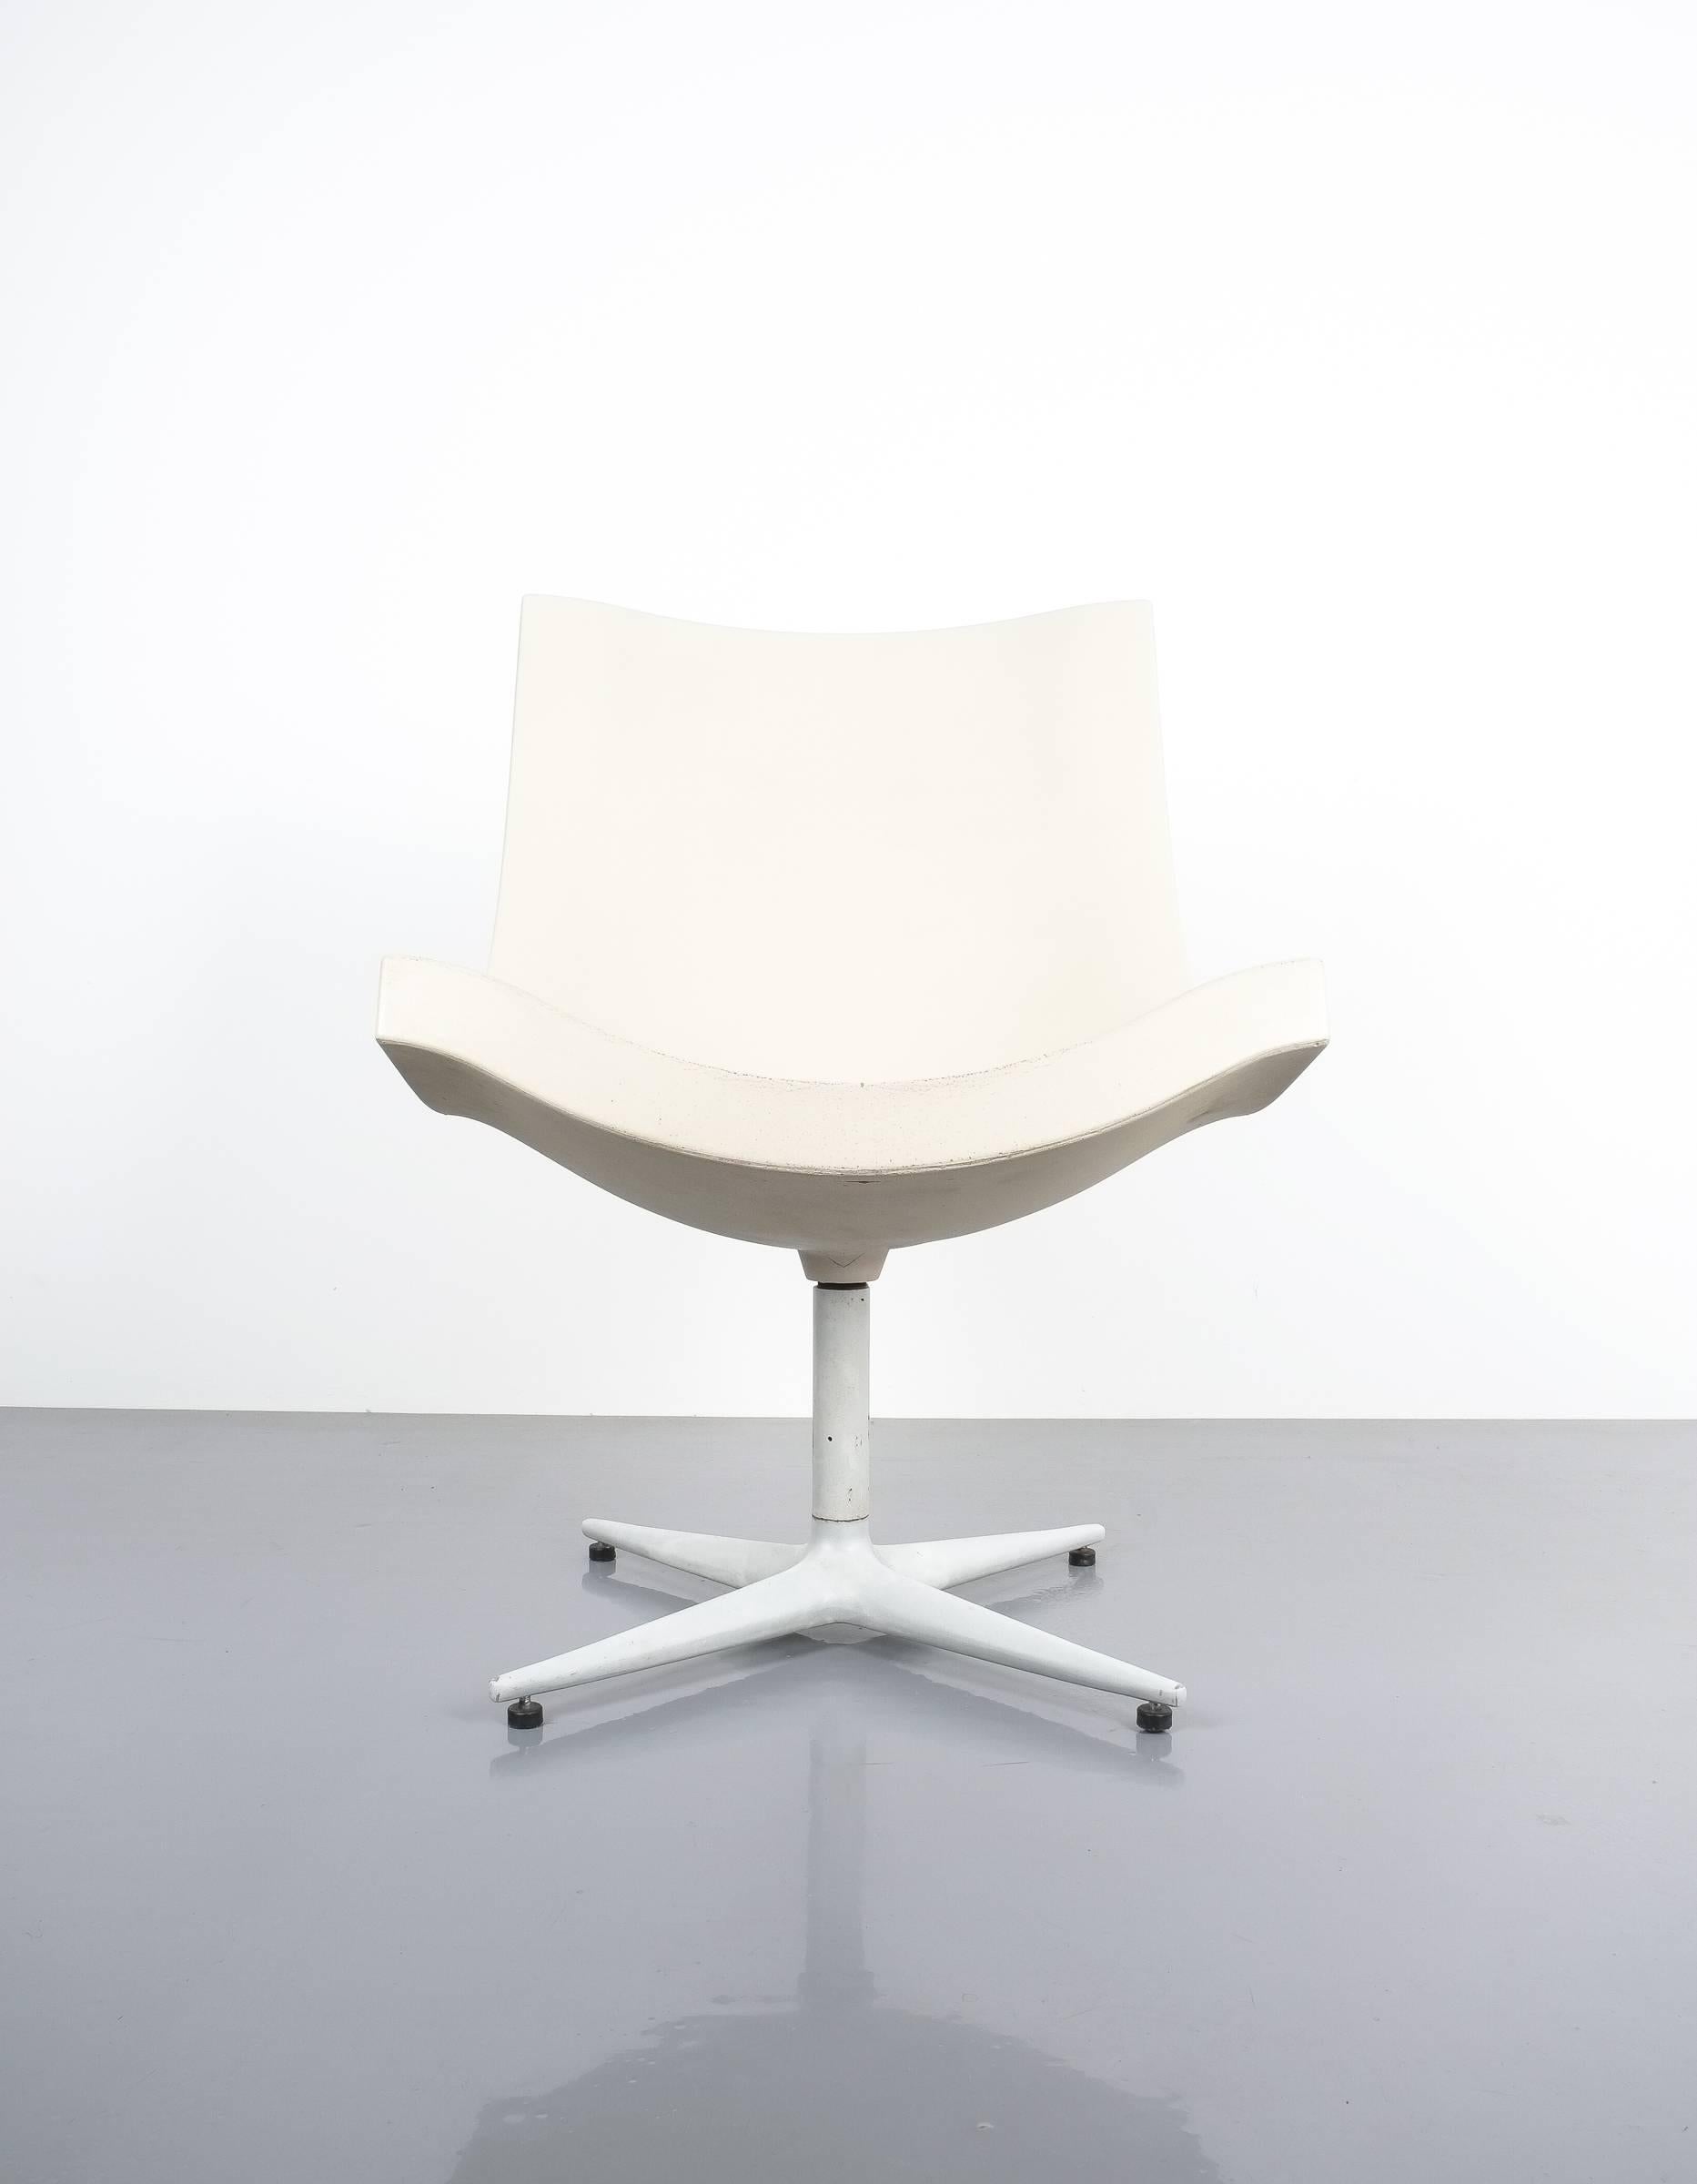 Christophe Pillet Y's chair by Cappellini, molded foam seat (Polyurethan) over swivel metal base with white lacquer finish, 22